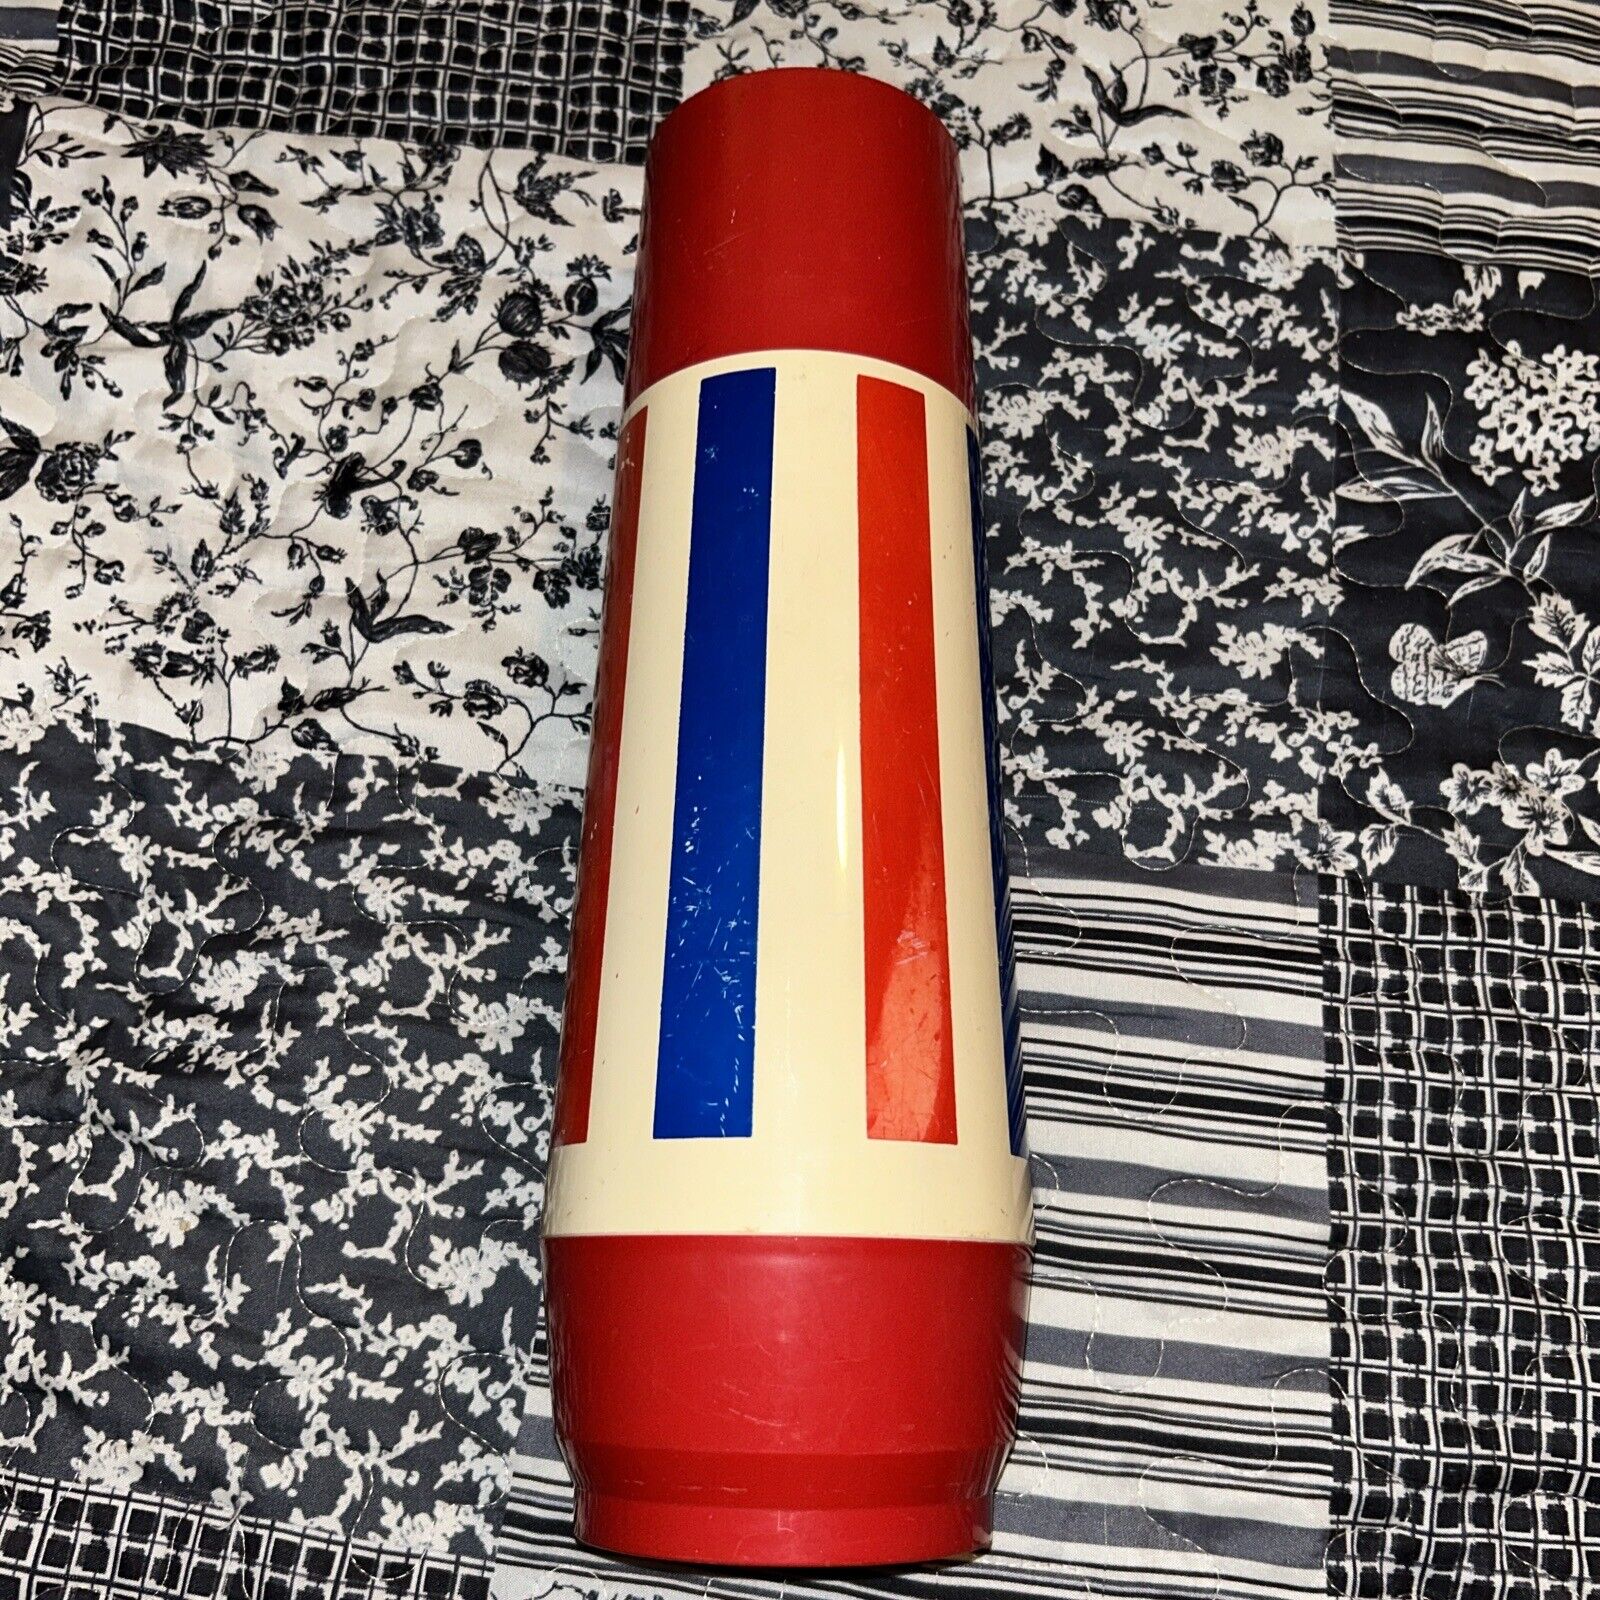 Vintage Thermo-Serv AMERICANA RED WHITE AND BLUE THERMOS by Westbend